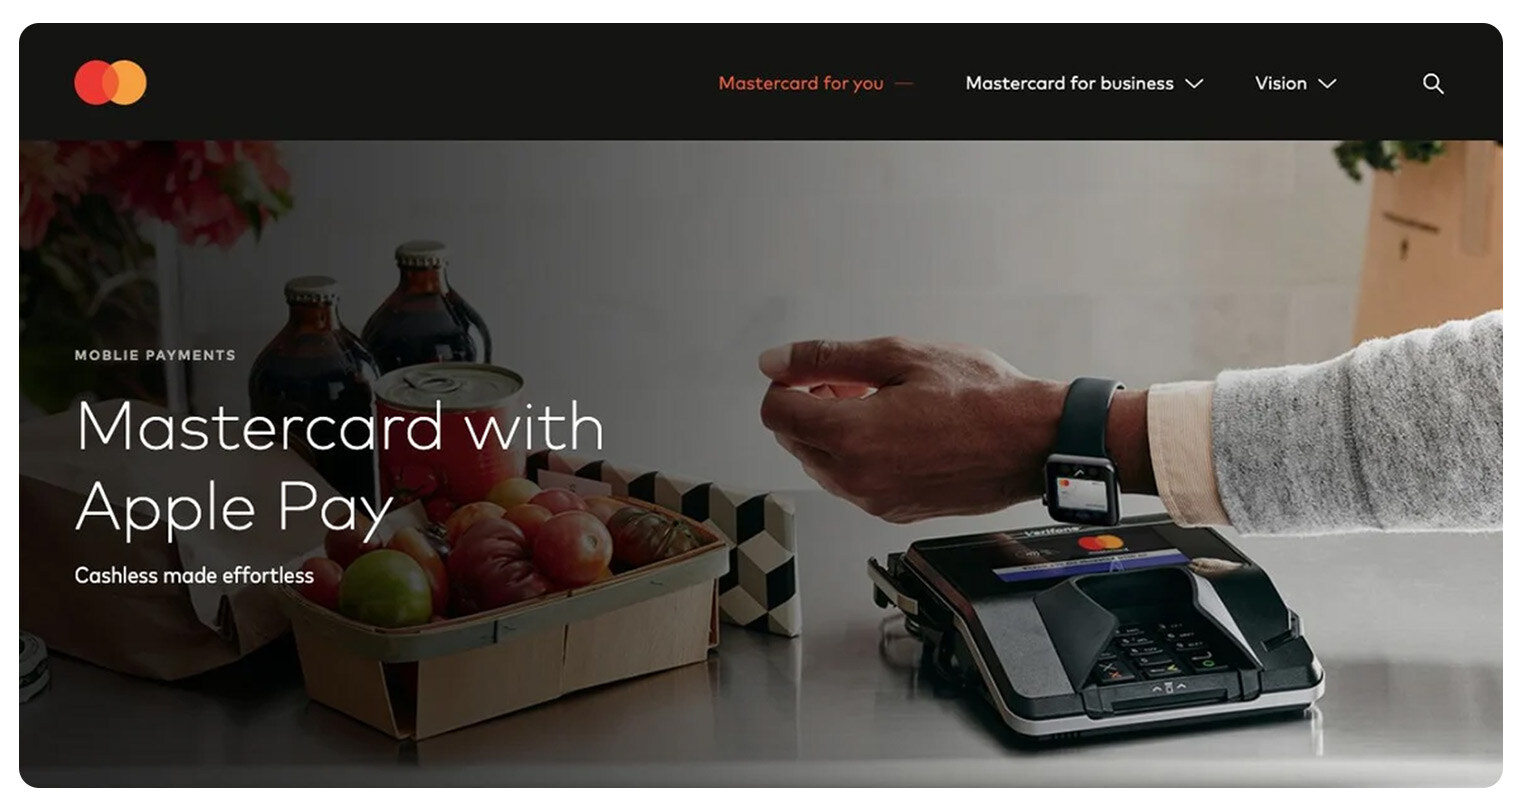 Mastercard with Apple Pay landing page with person paying using an apples watch